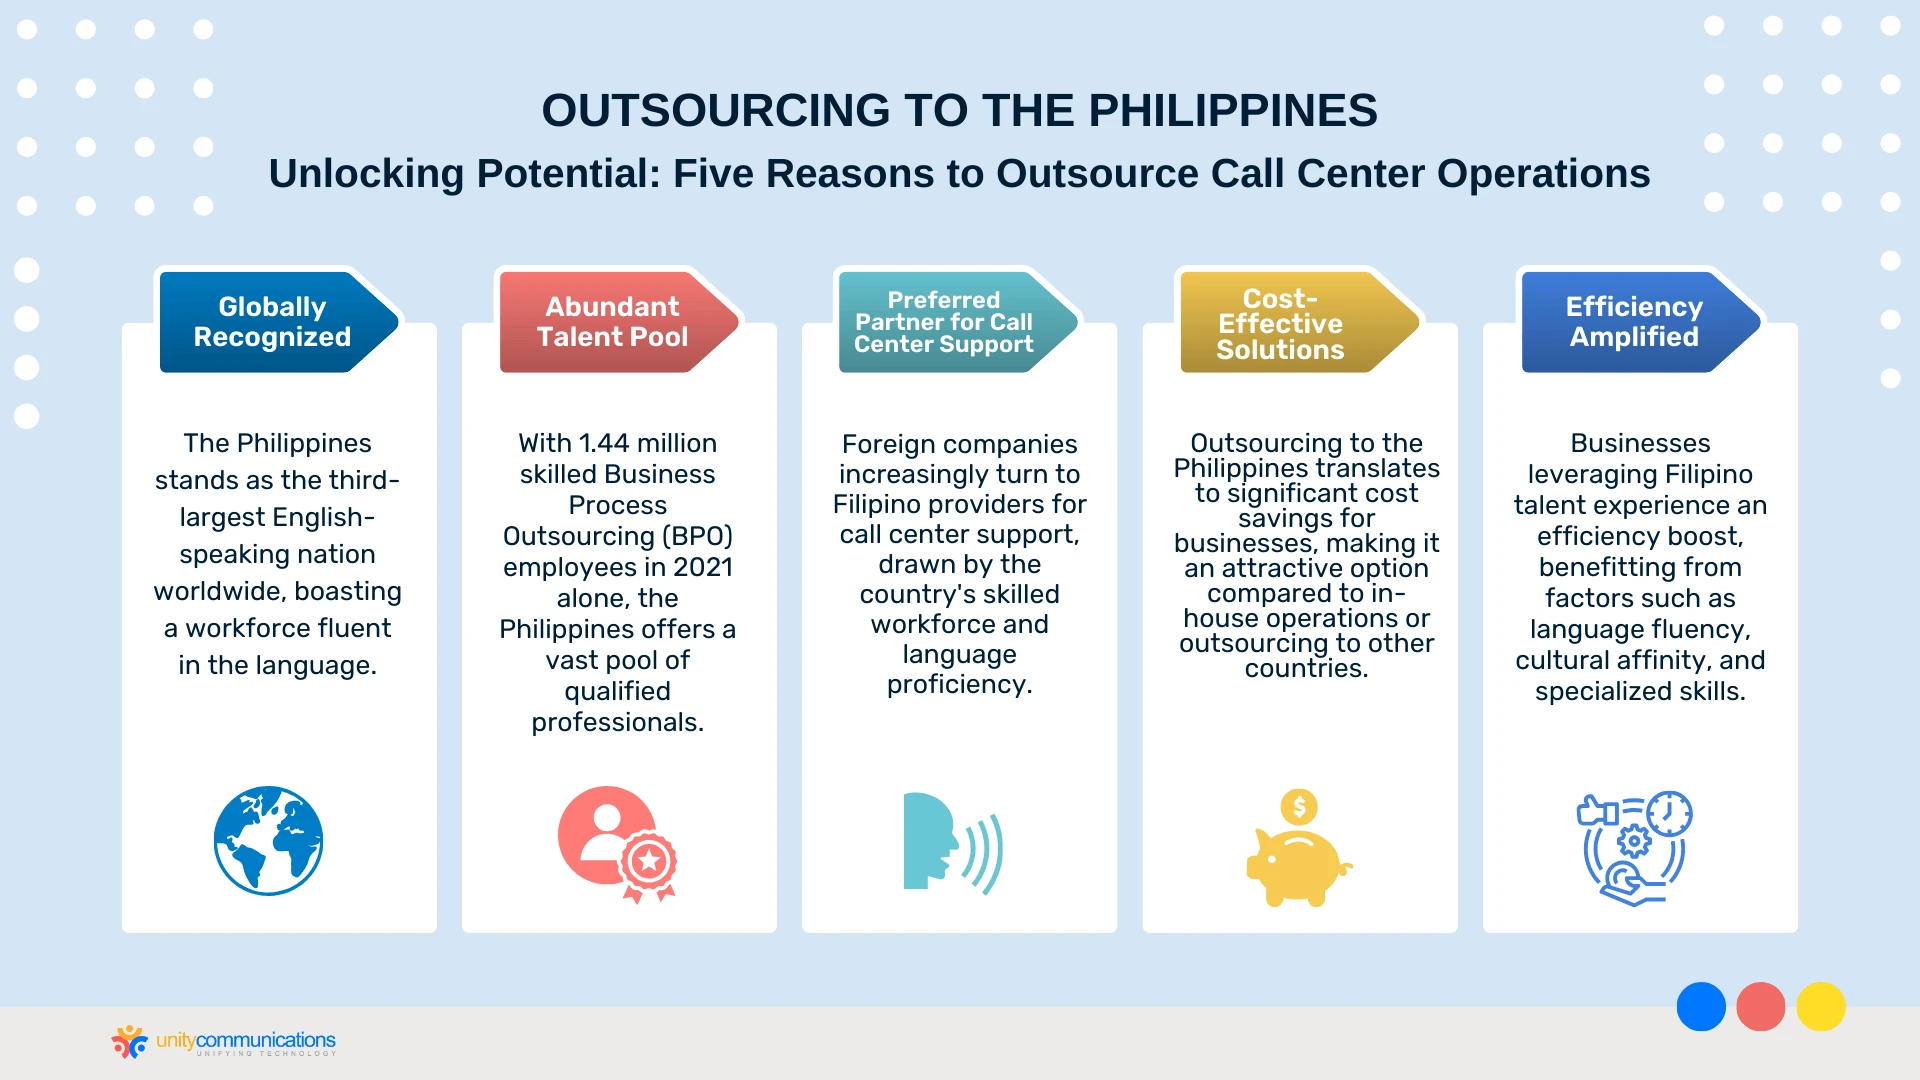 Unlocking Potential: Outsourcing to the Philippines